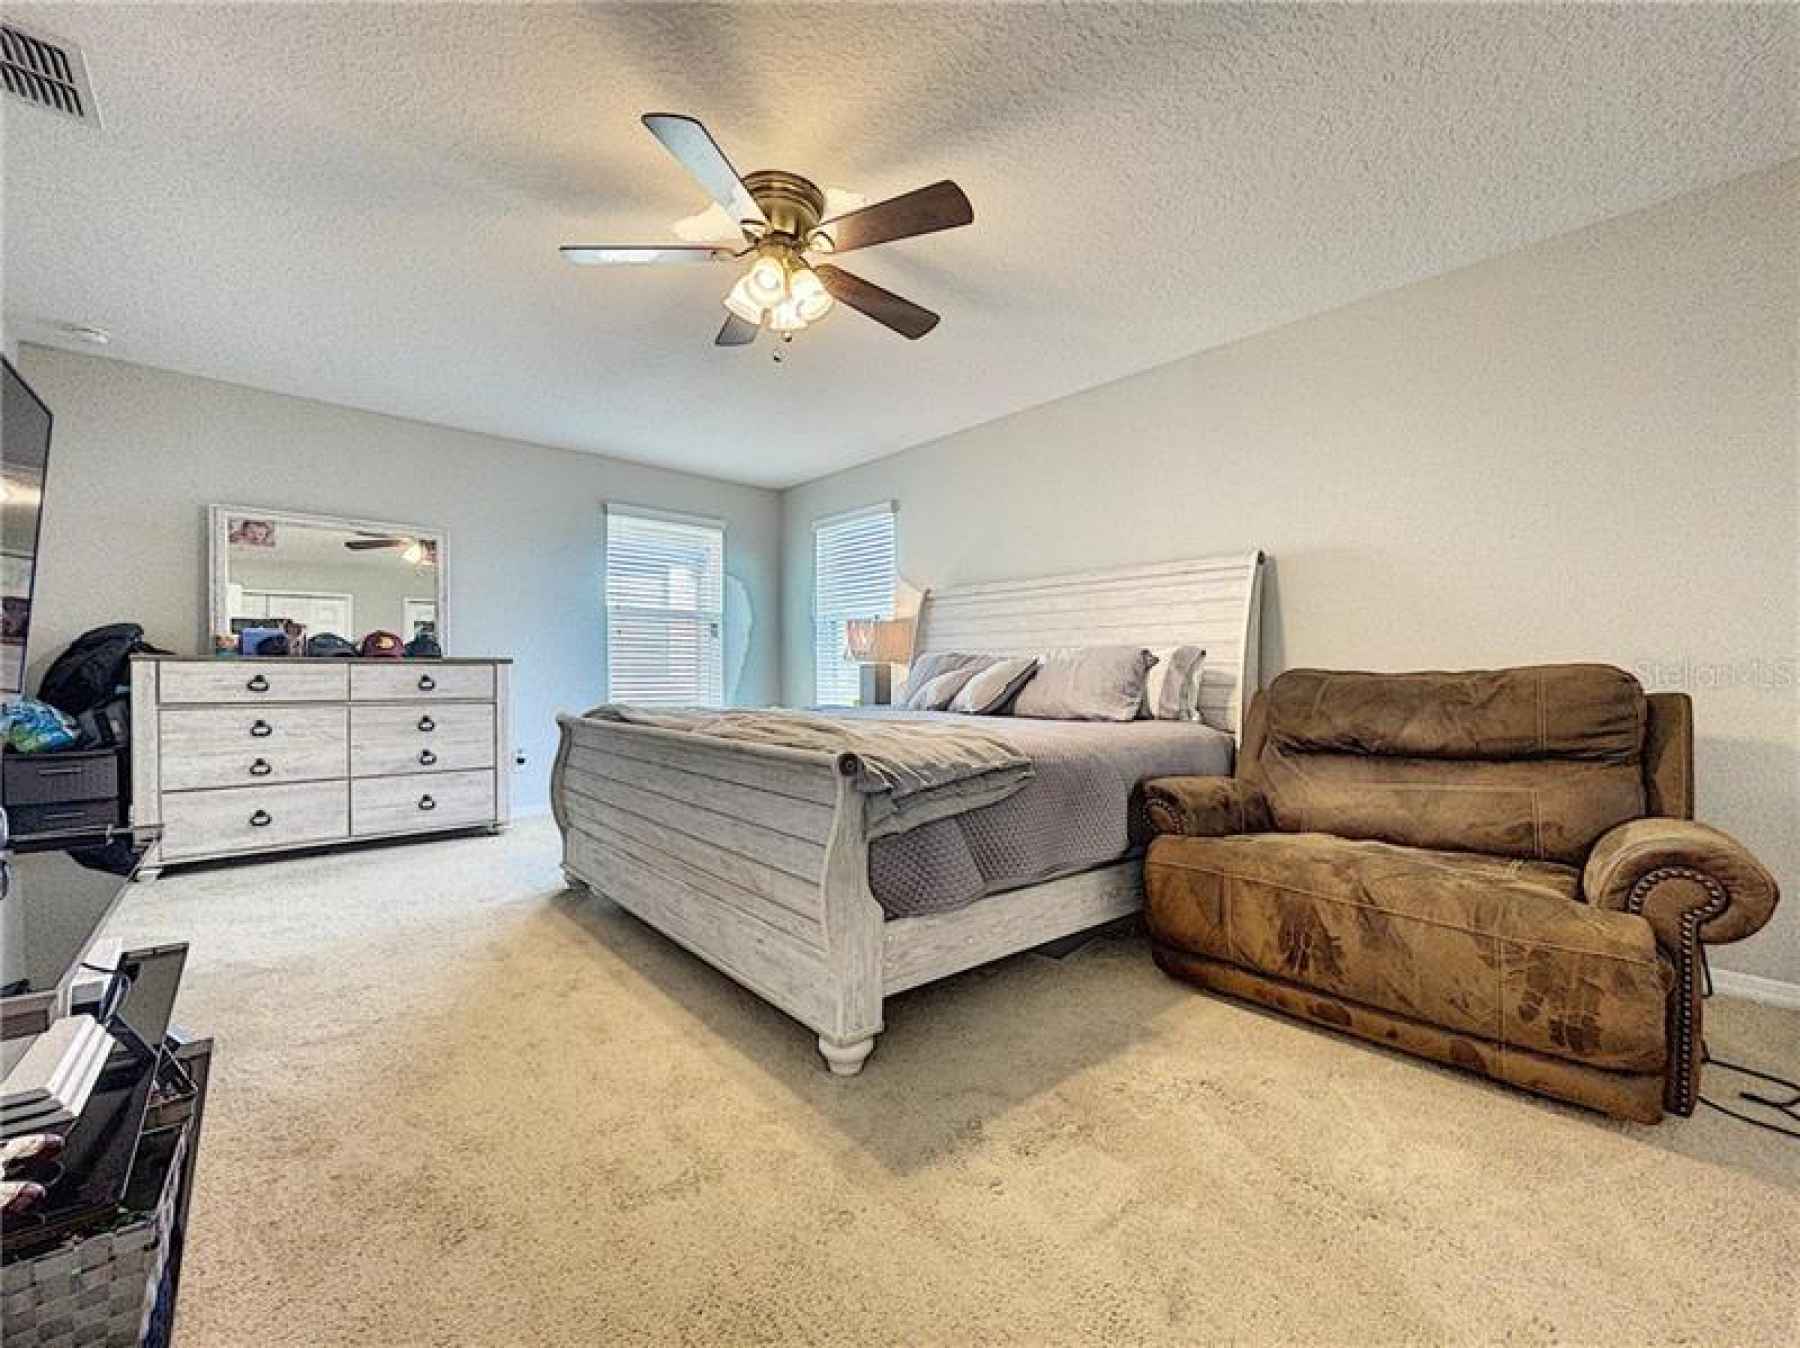 Spacious bedroom on second floor with attached bathroom